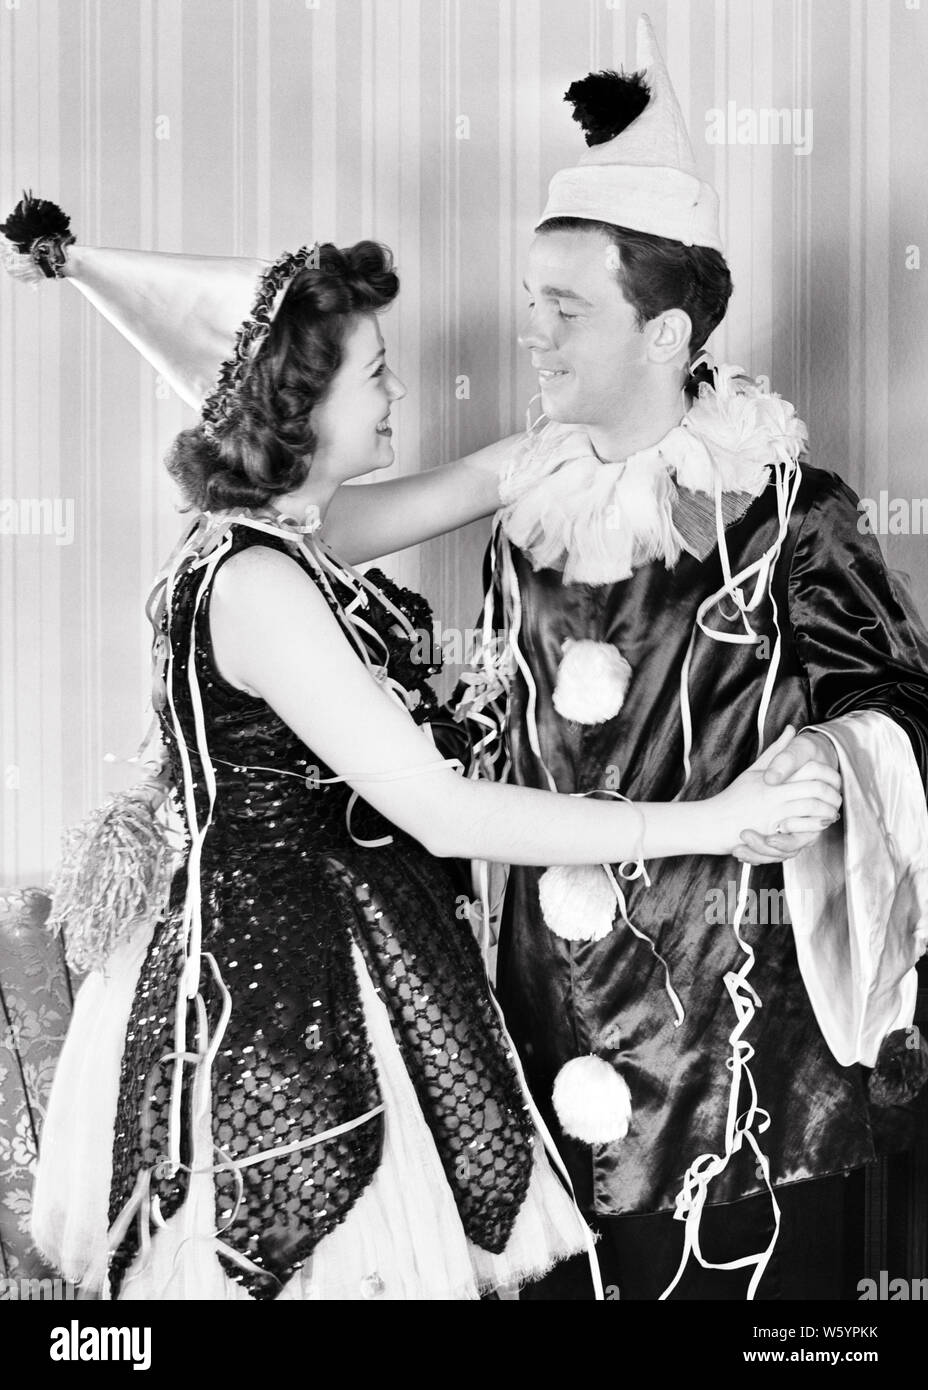 1940s SMILING COUPLE MAN AND WOMAN DANCING TOGETHER AT COSTUME PARTY - d897  HAR001 HARS EXPRESSION DANCERS MAGIC OLD TIME SURPRISE NOSTALGIA OLD  FASHION 1 SILLY FACIAL STYLE YOUNG ADULT BALANCE COMIC